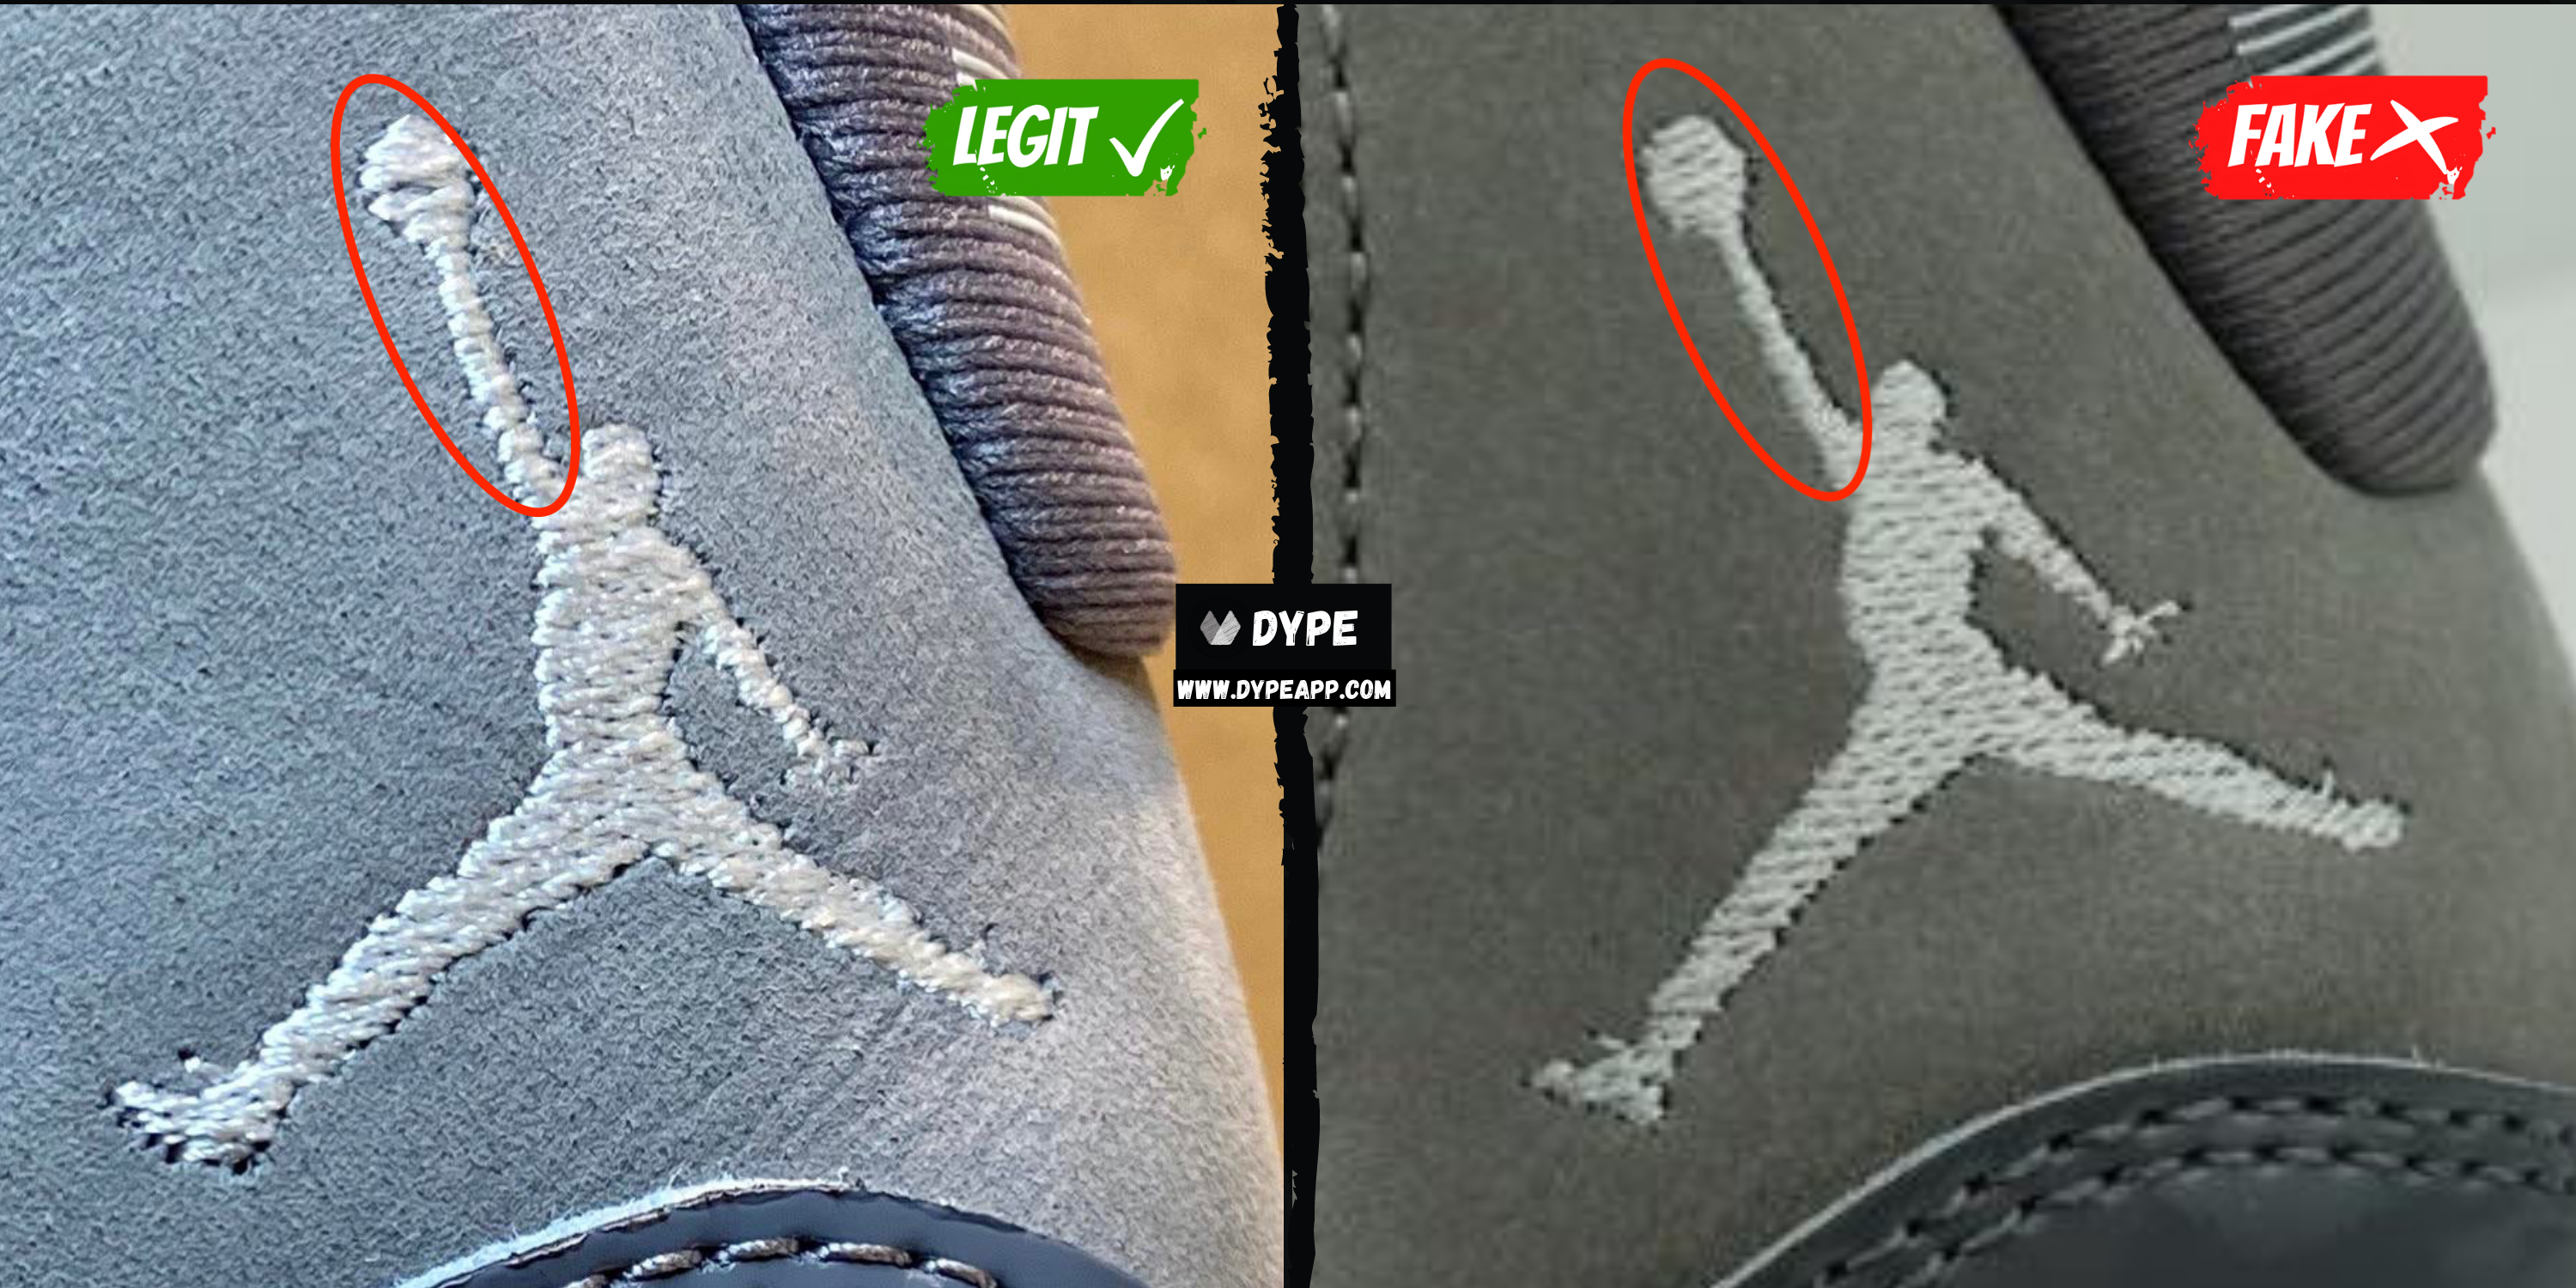 how can i tell if my jordan 11 are real